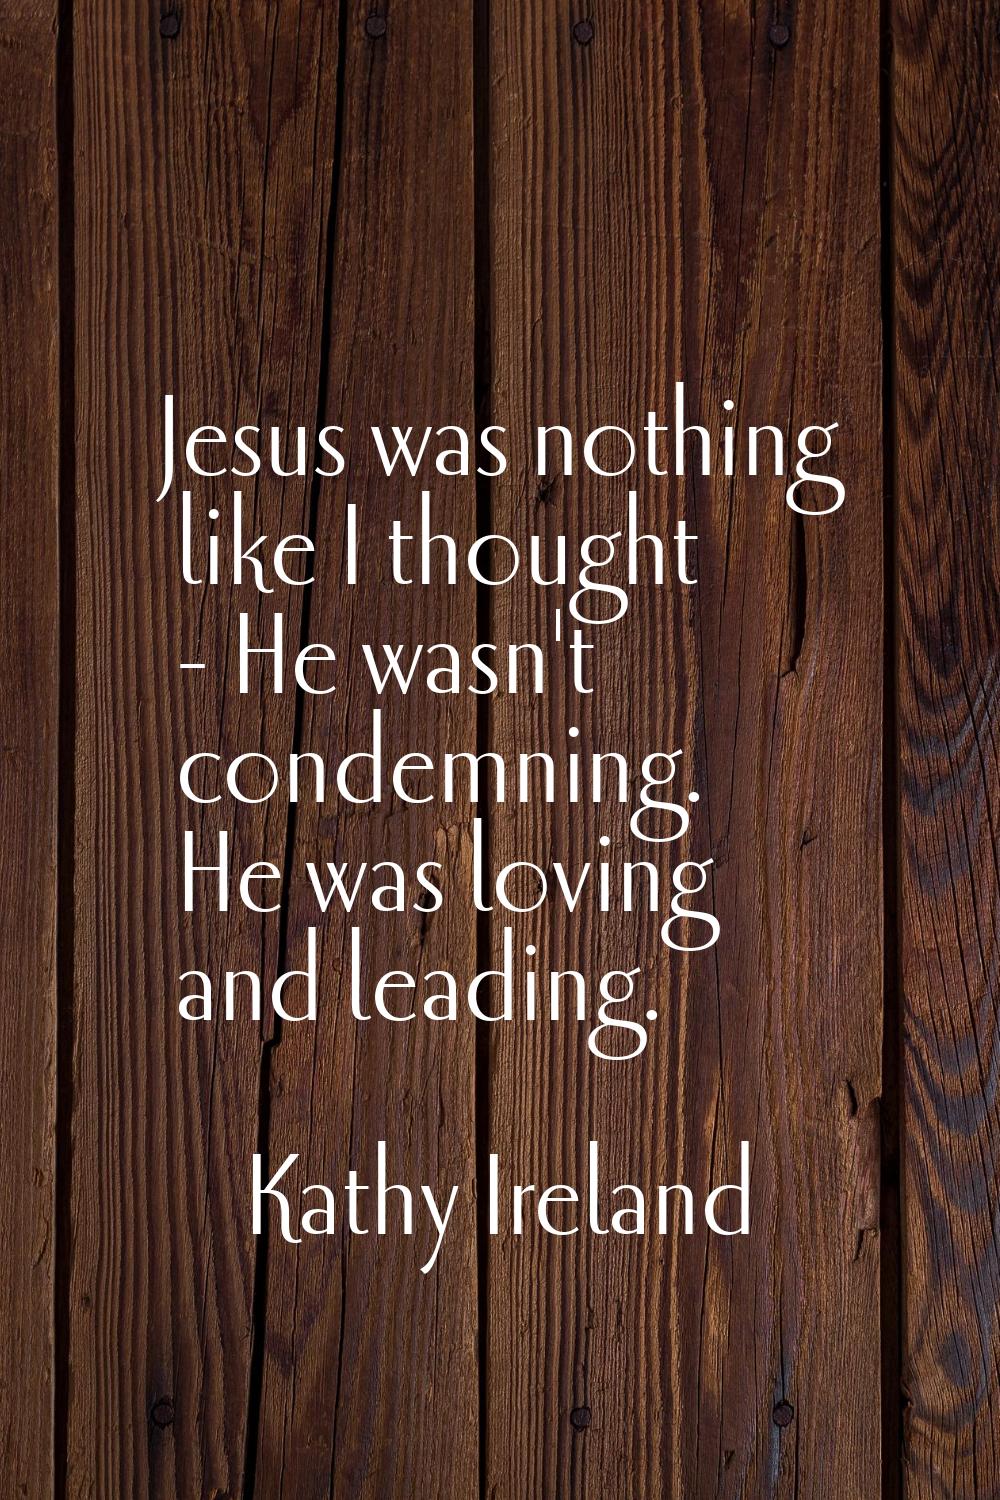 Jesus was nothing like I thought - He wasn't condemning. He was loving and leading.